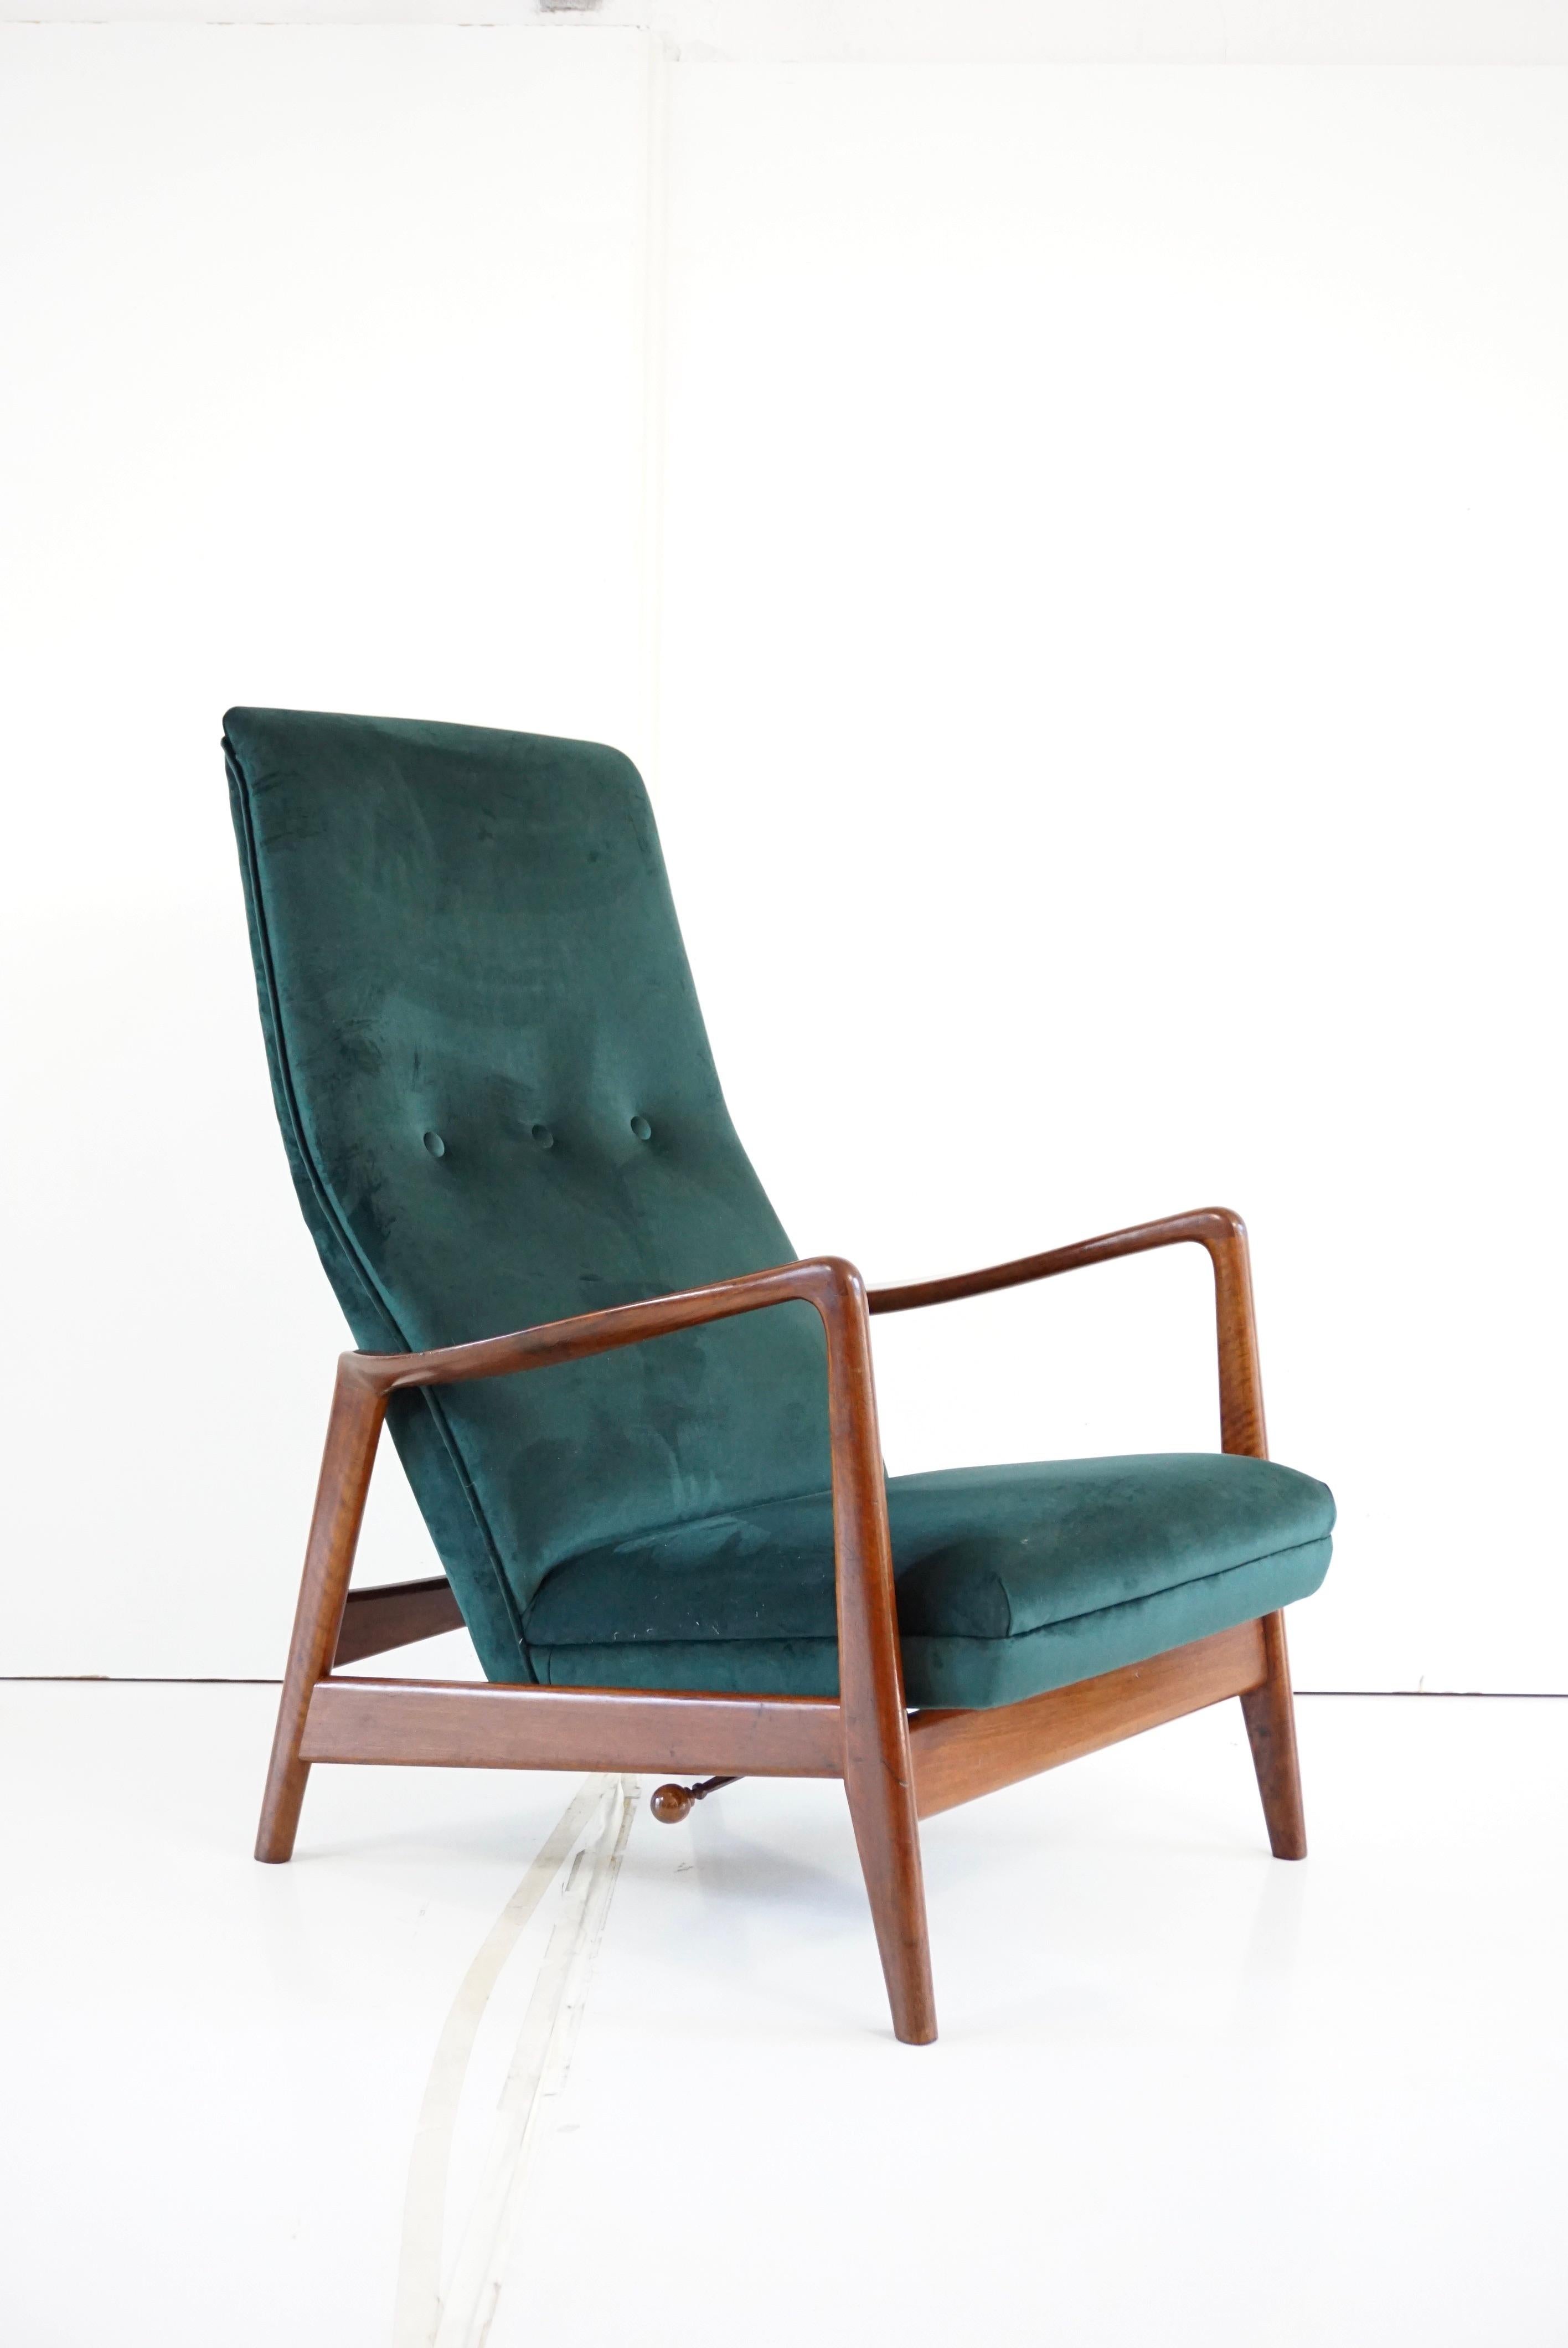 Luonge chair model n. 829 produced by Cassina in 1960.
this model was selected by GIO PONTI for the furniture of the Hotel Parco dei Principi in Sorrento in 1960.
adjustable lounge chair ,totally reupholstered in 